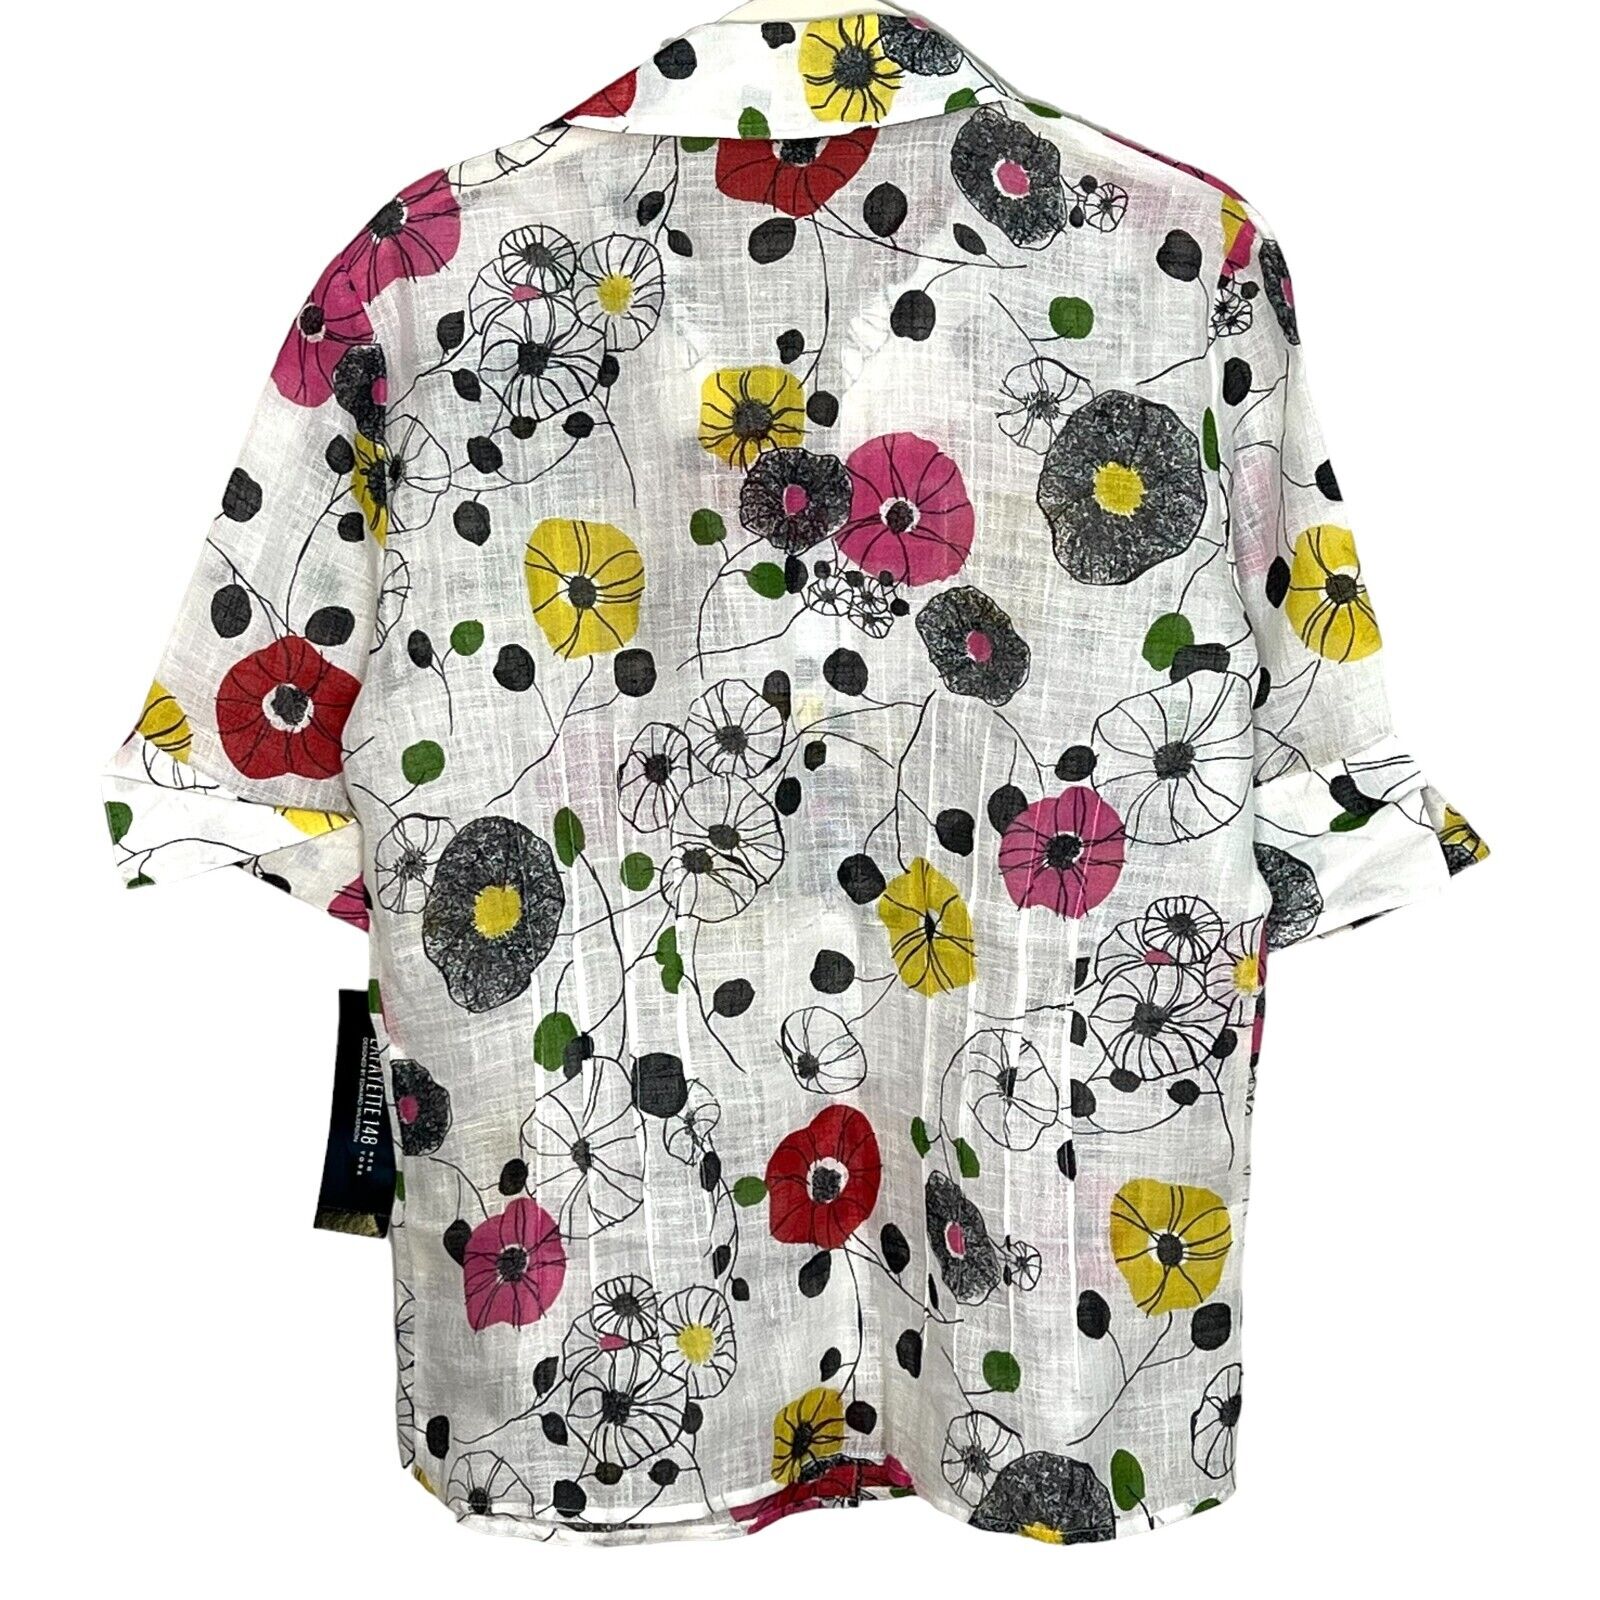 Lafayette 148 NY Multicolor Floral Linen Short Sleeve Shirt Size 6 NEW $328